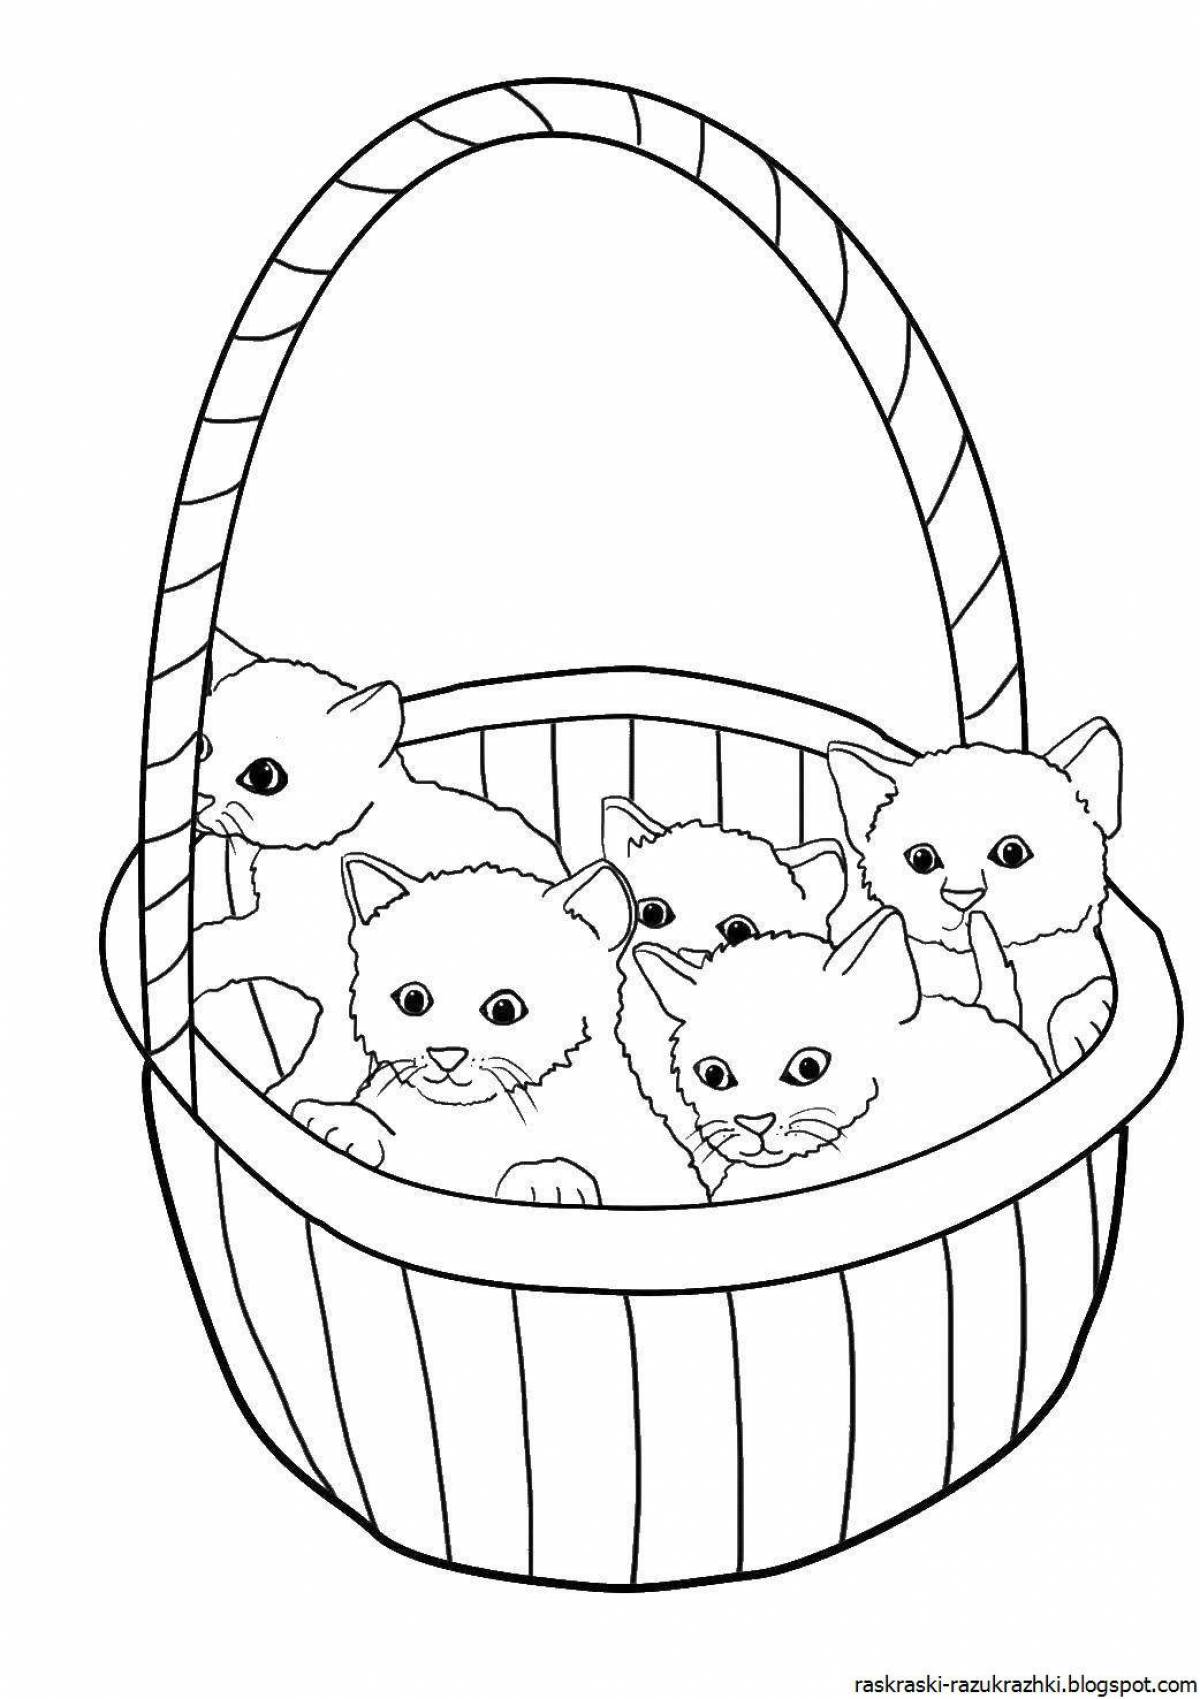 Glossy kitty coloring book